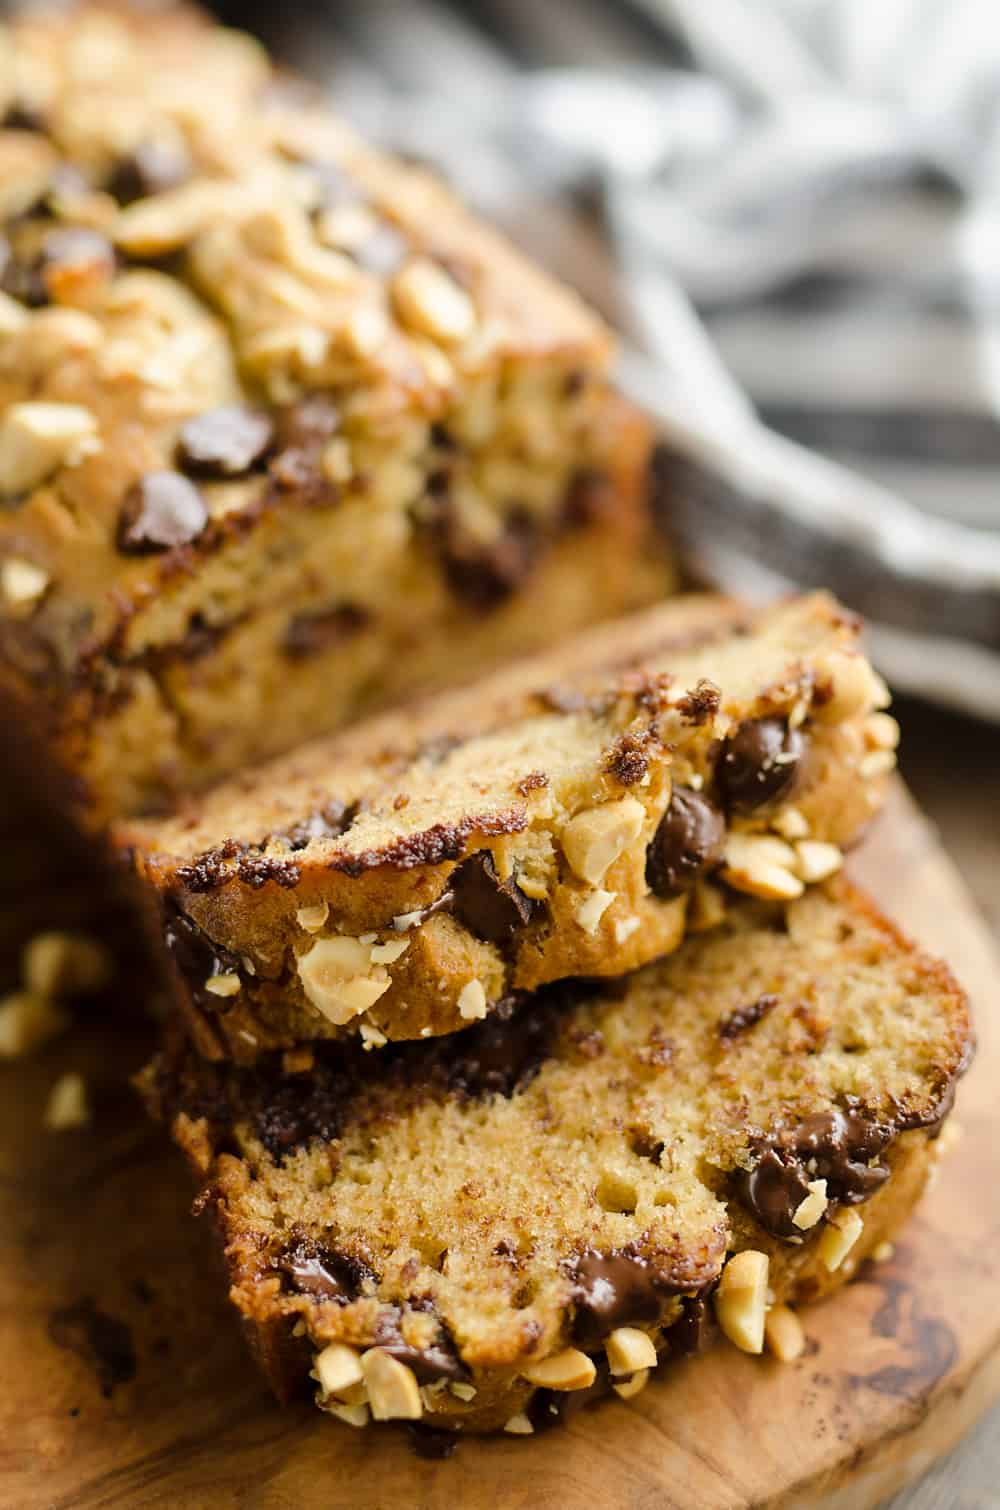 Peanut Butter Chocolate Banana Bread sliced for serving